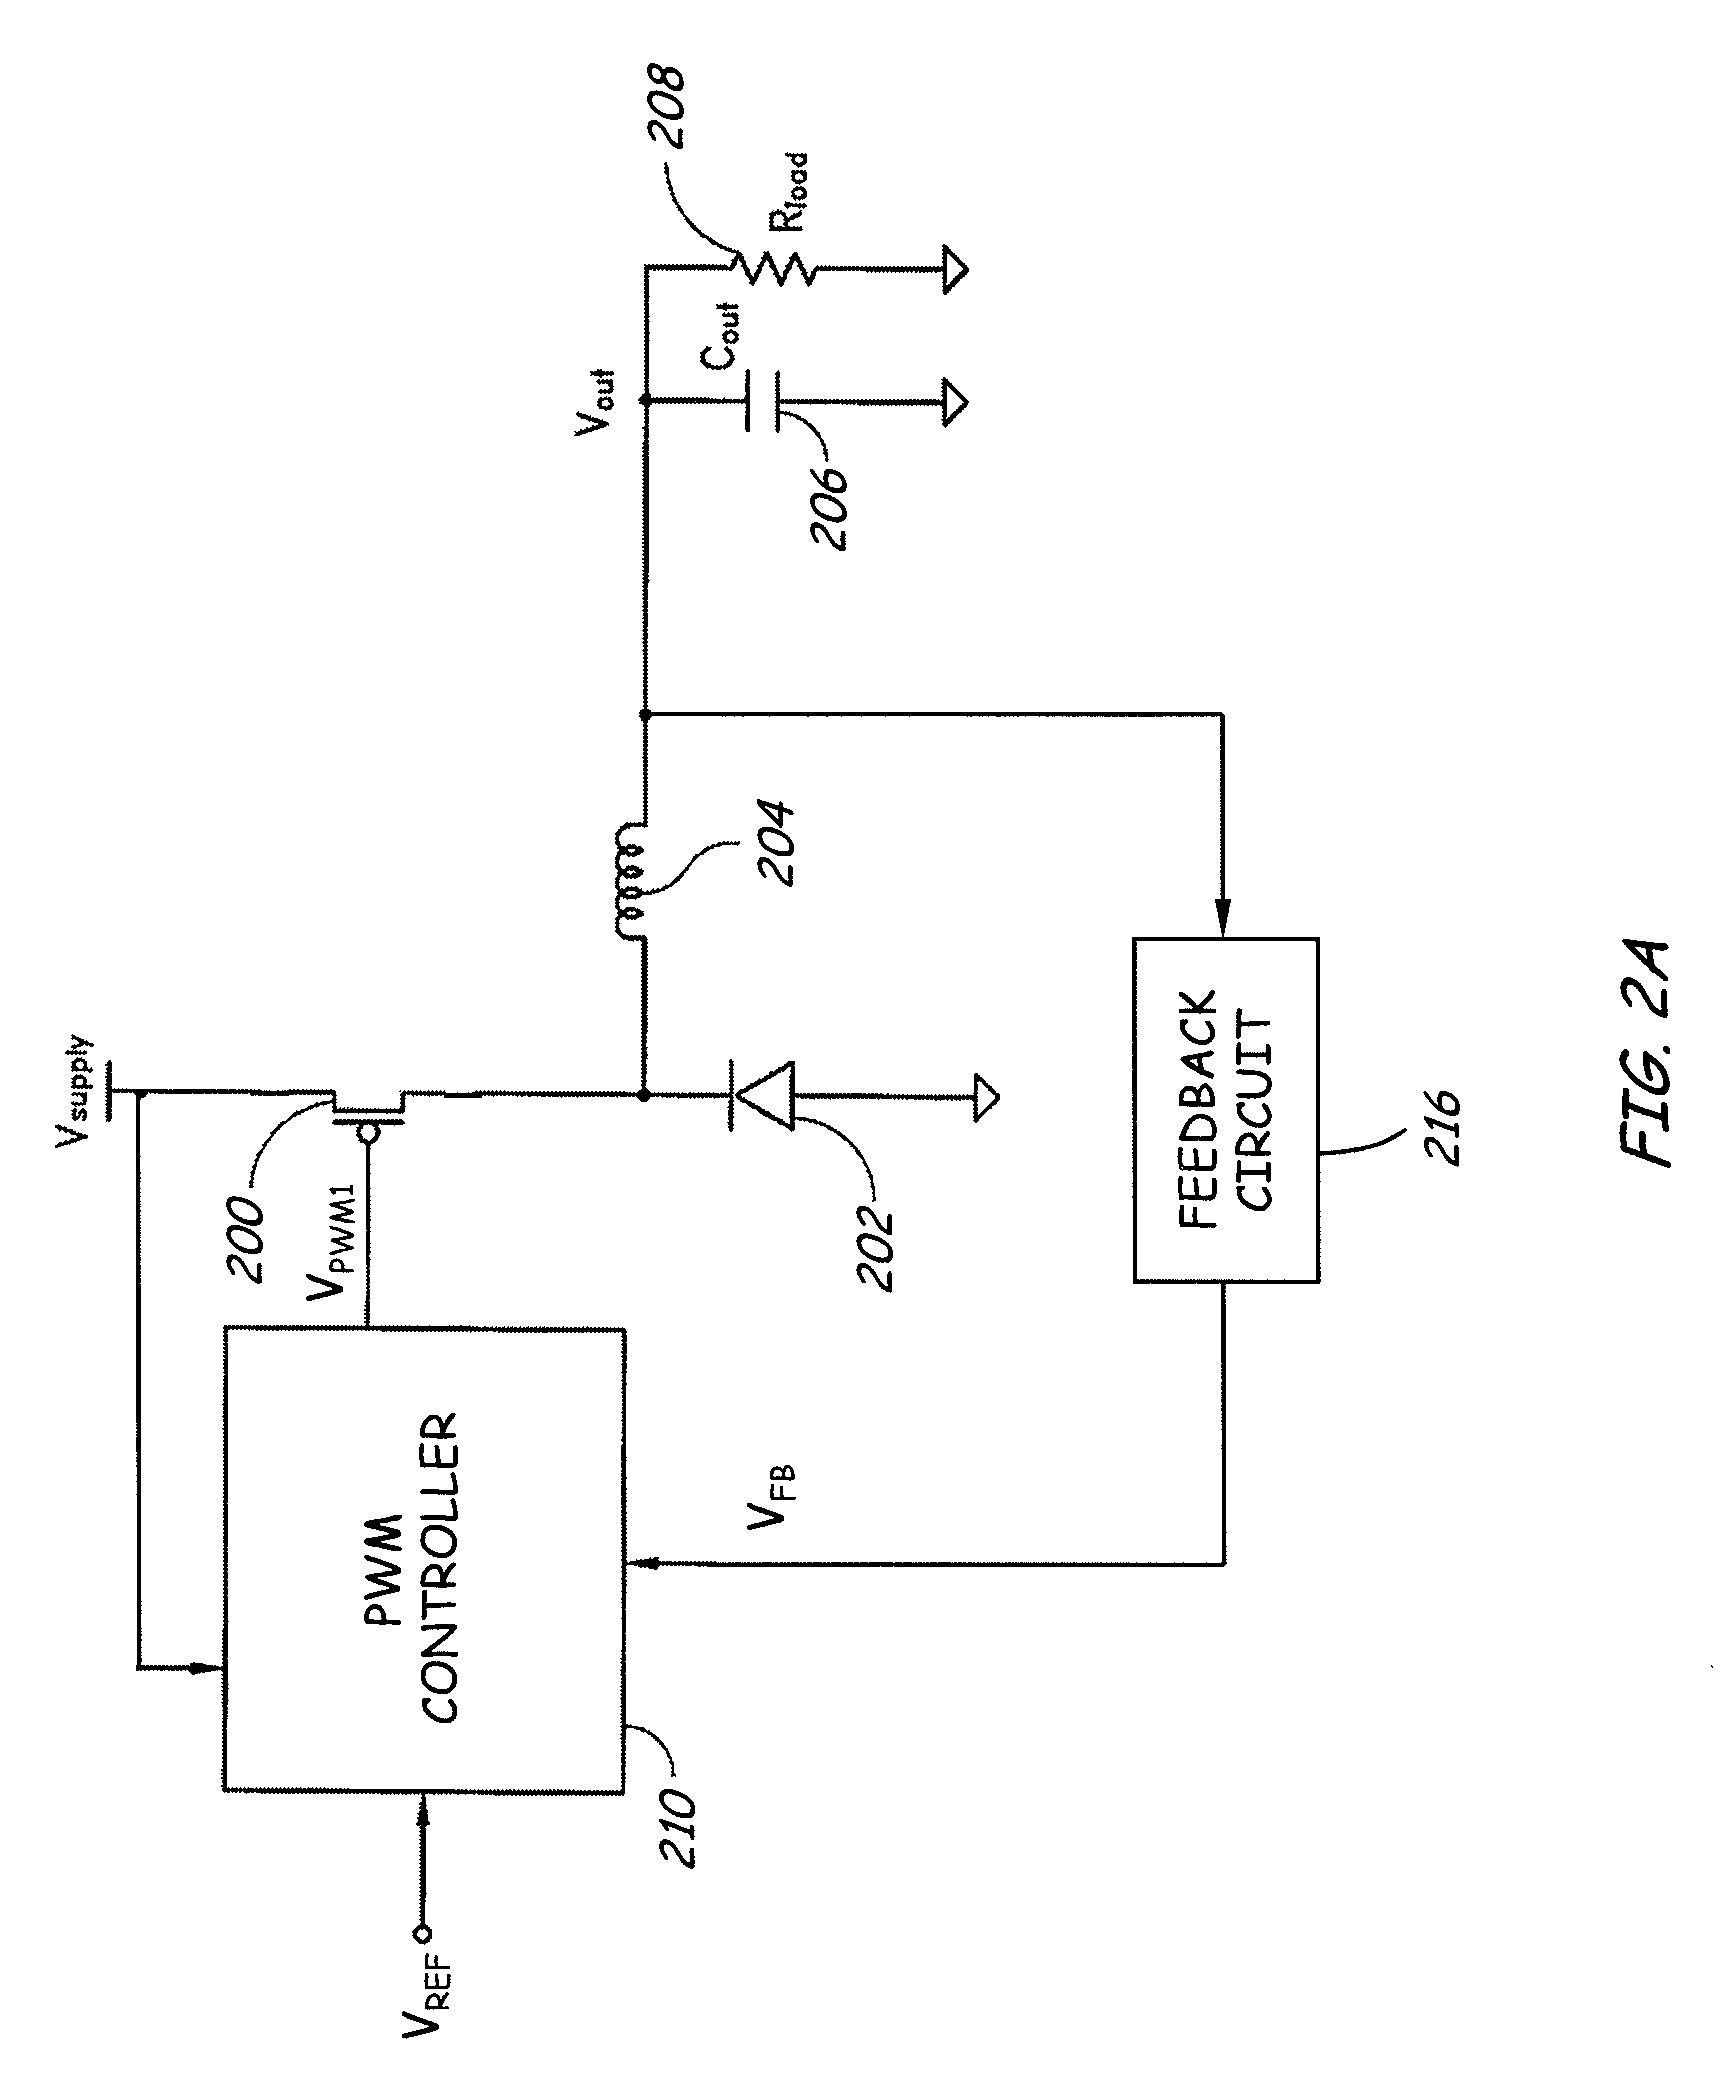 Method and apparatus to compensate for supply voltage variations in a PWM-based voltage regulator